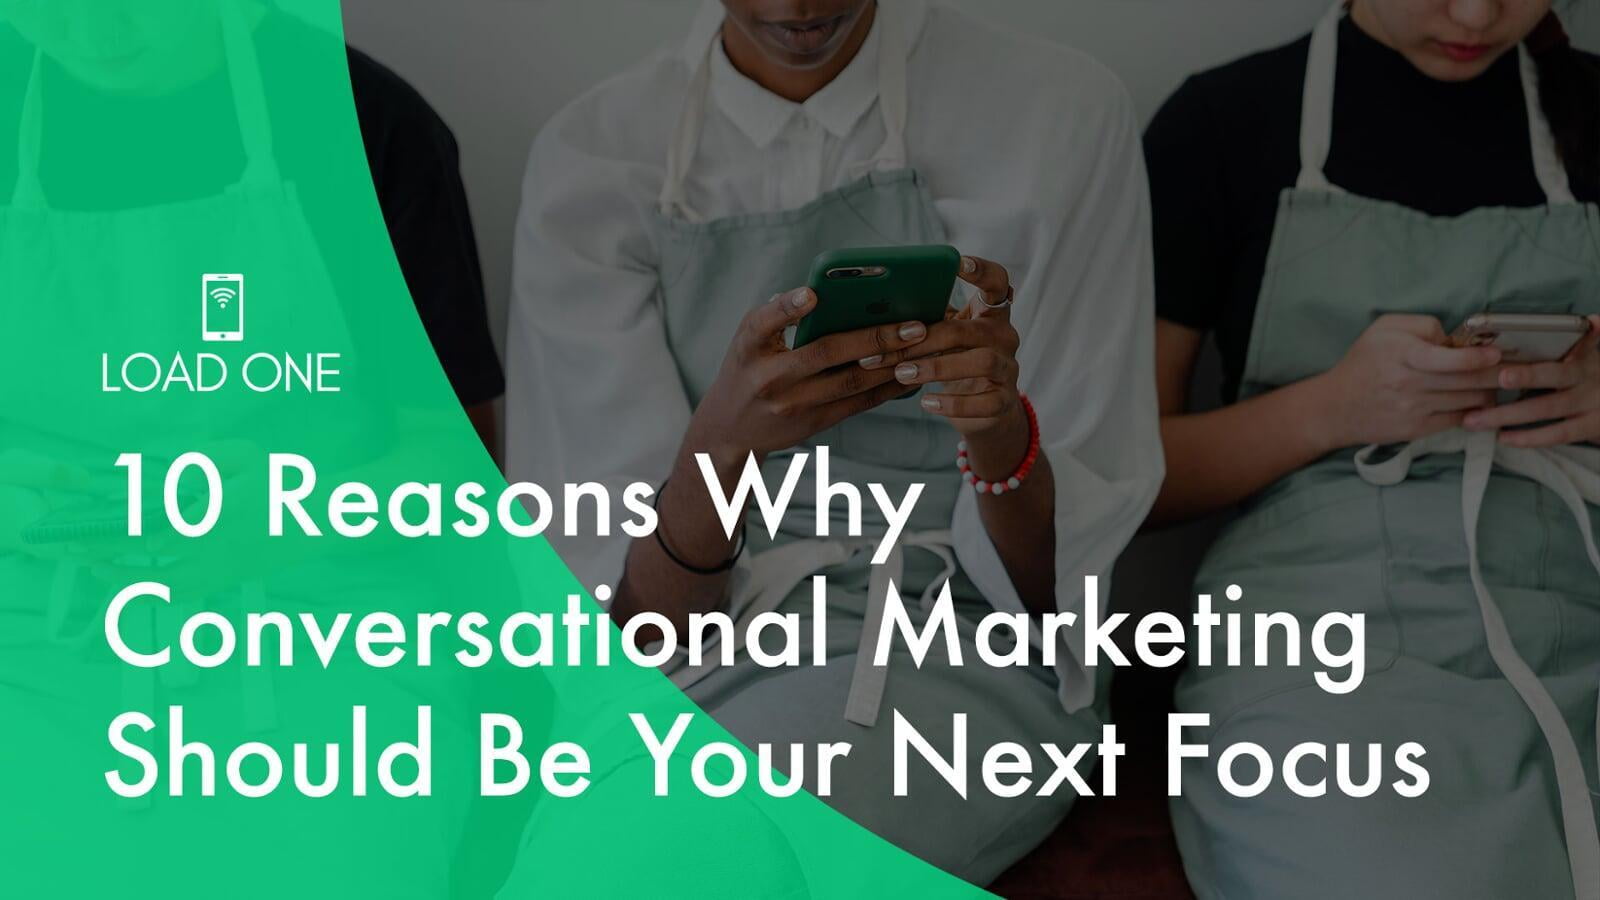 10 Reasons Why Conversational Marketing Should Be Your Next Focus